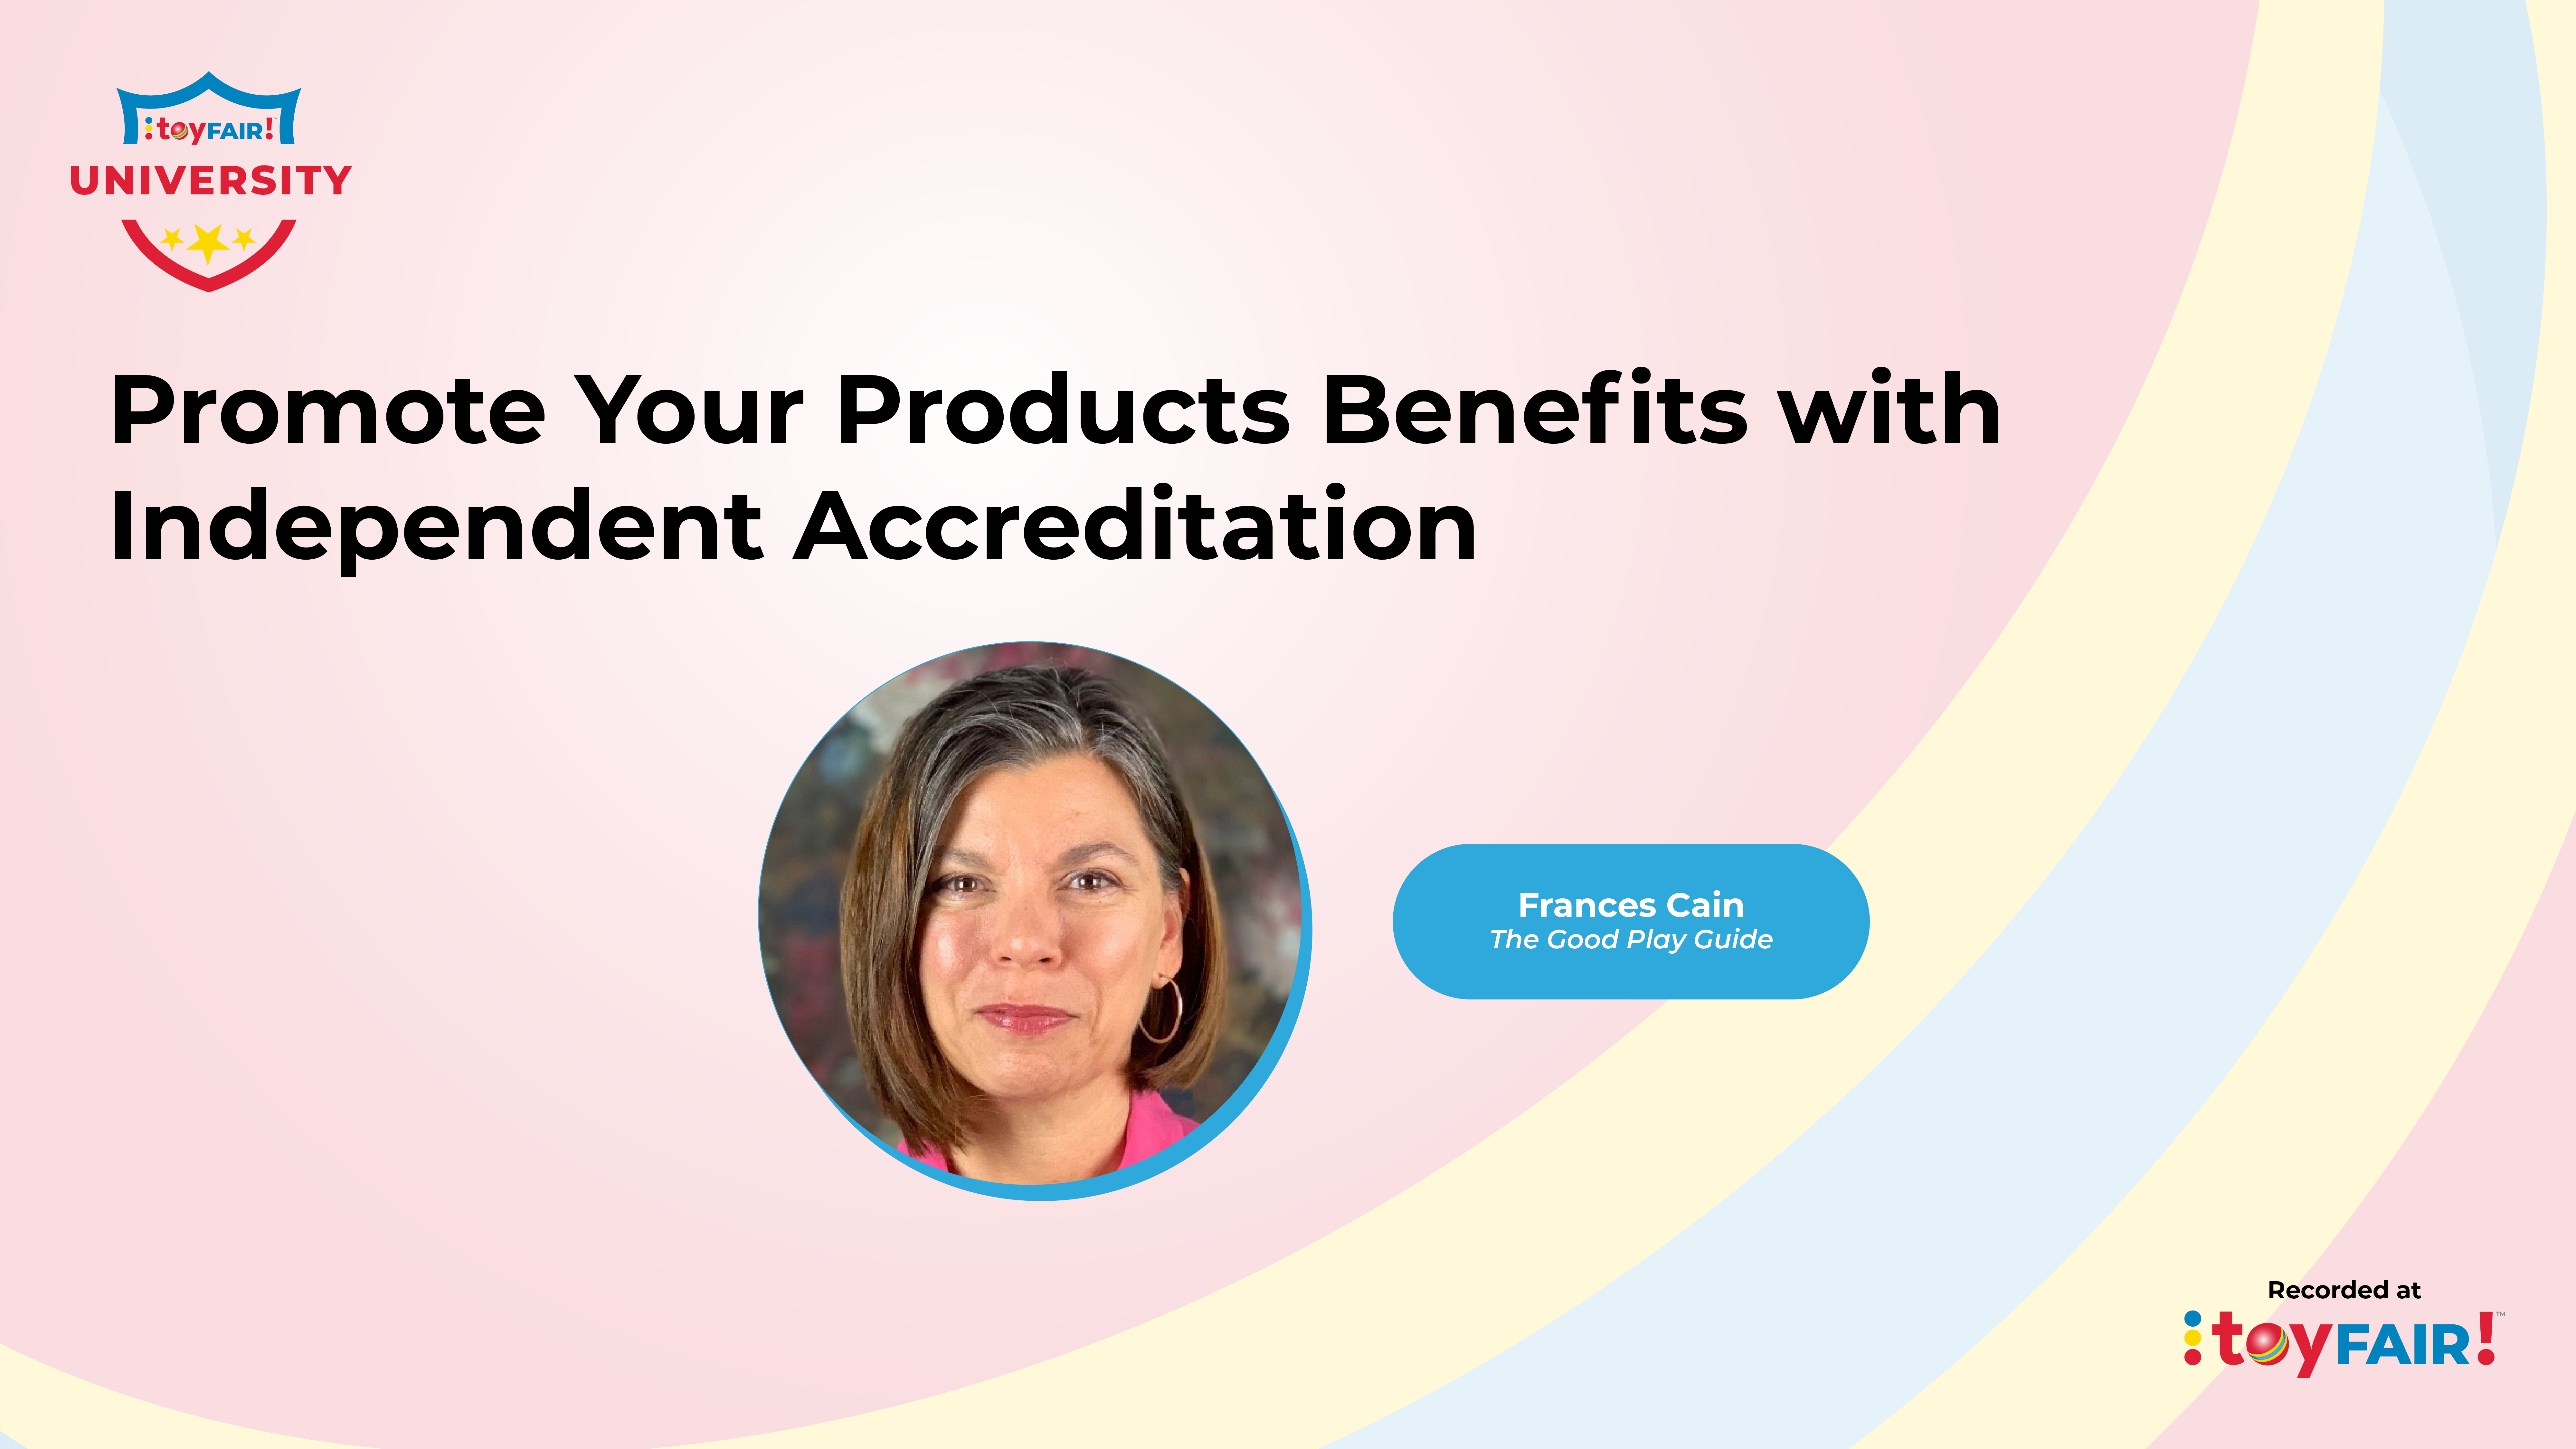 Promote Your Products Benefits with Independent Accreditation